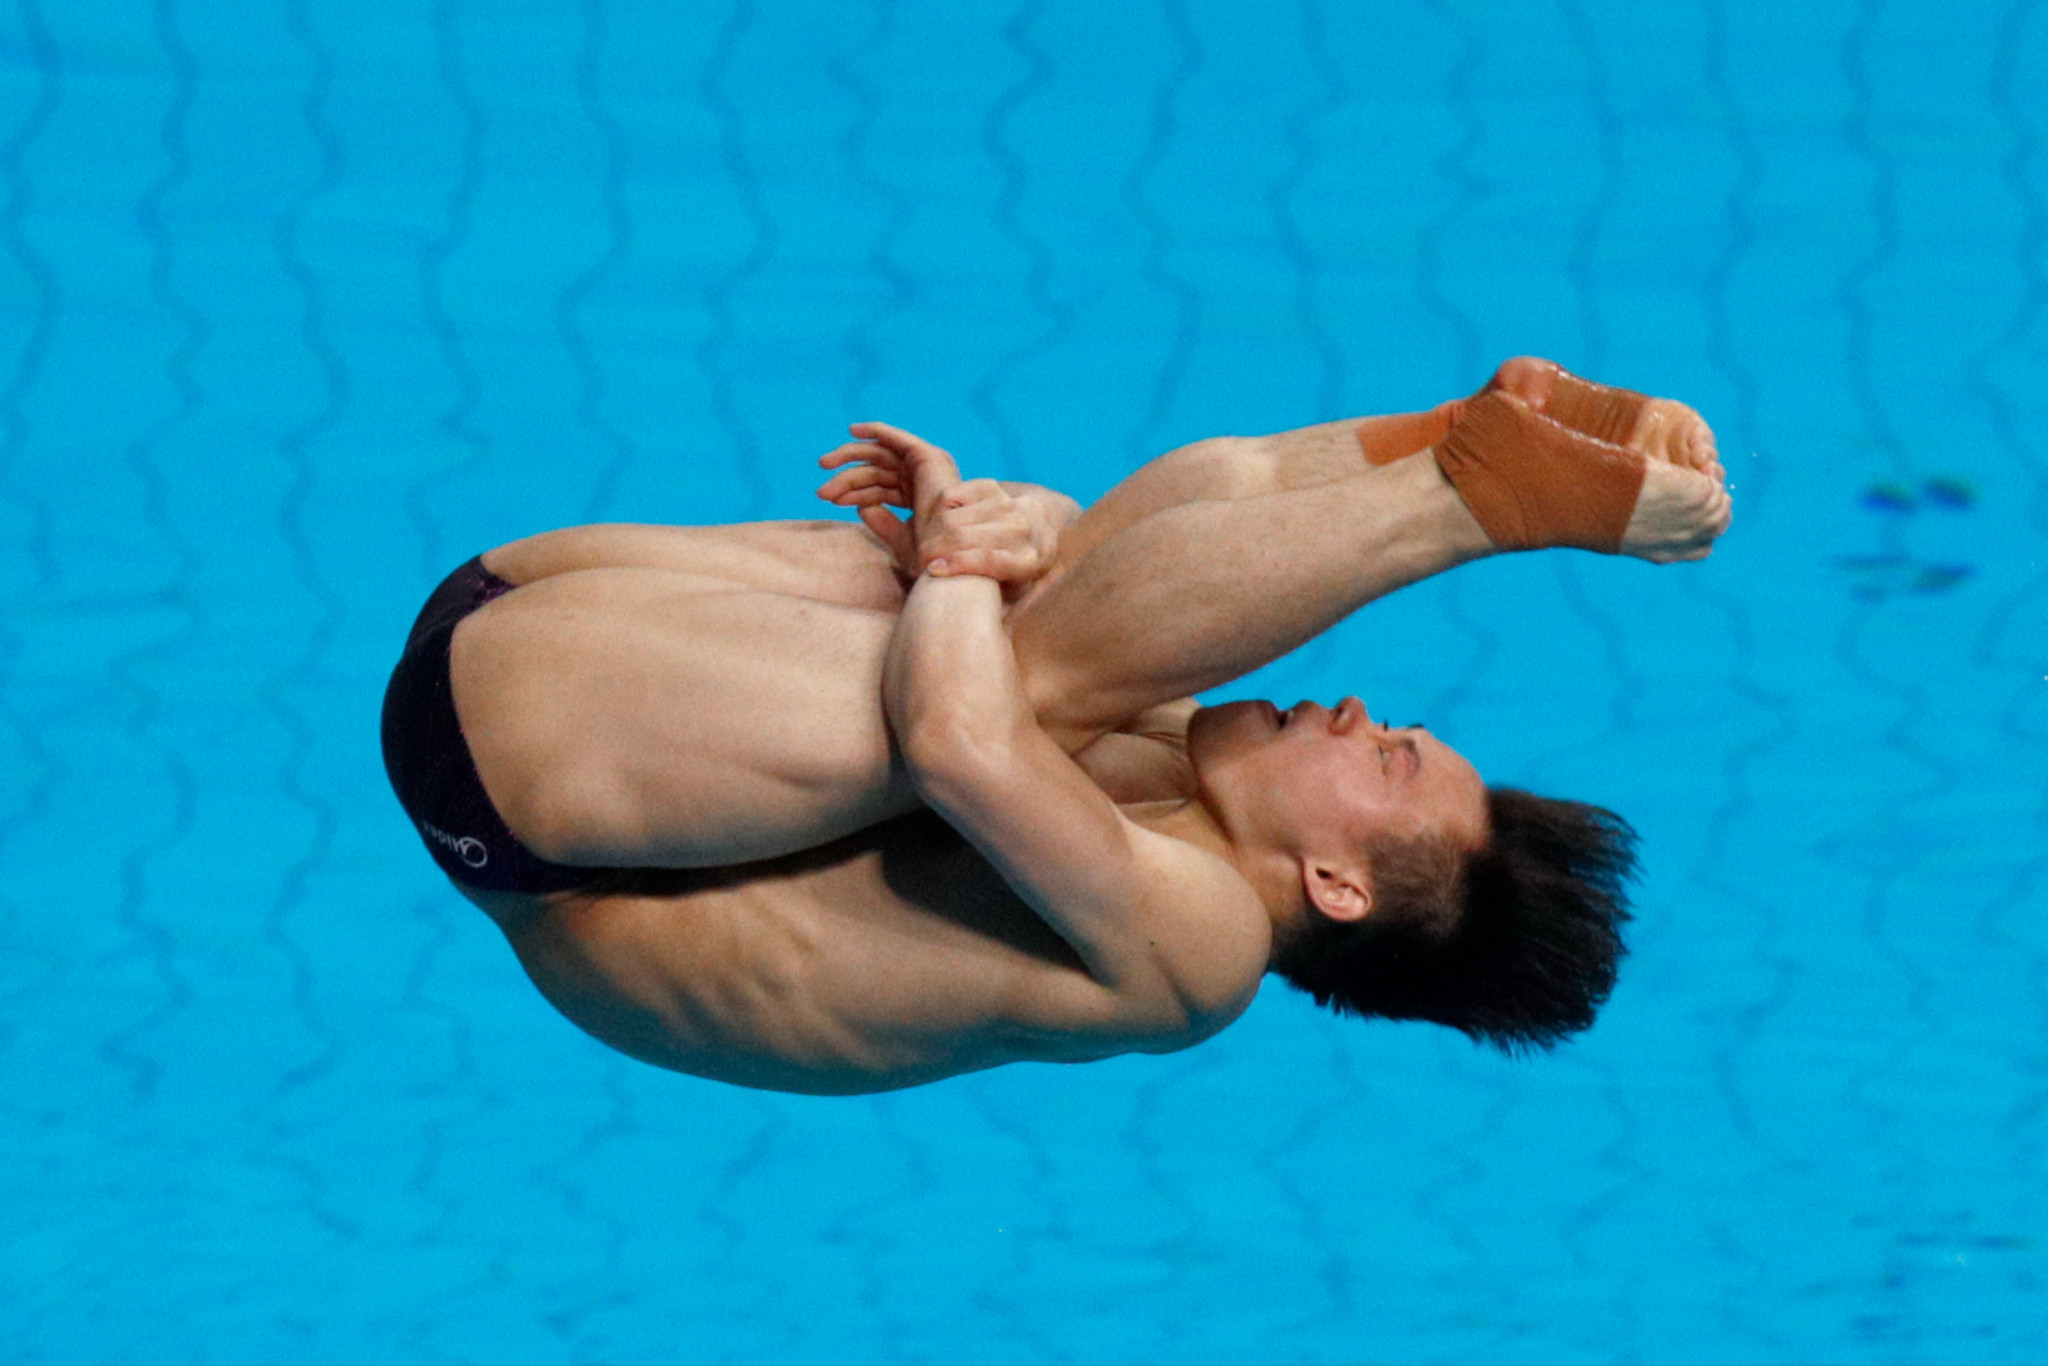 Chinese domination continues at FINA Diving World Series